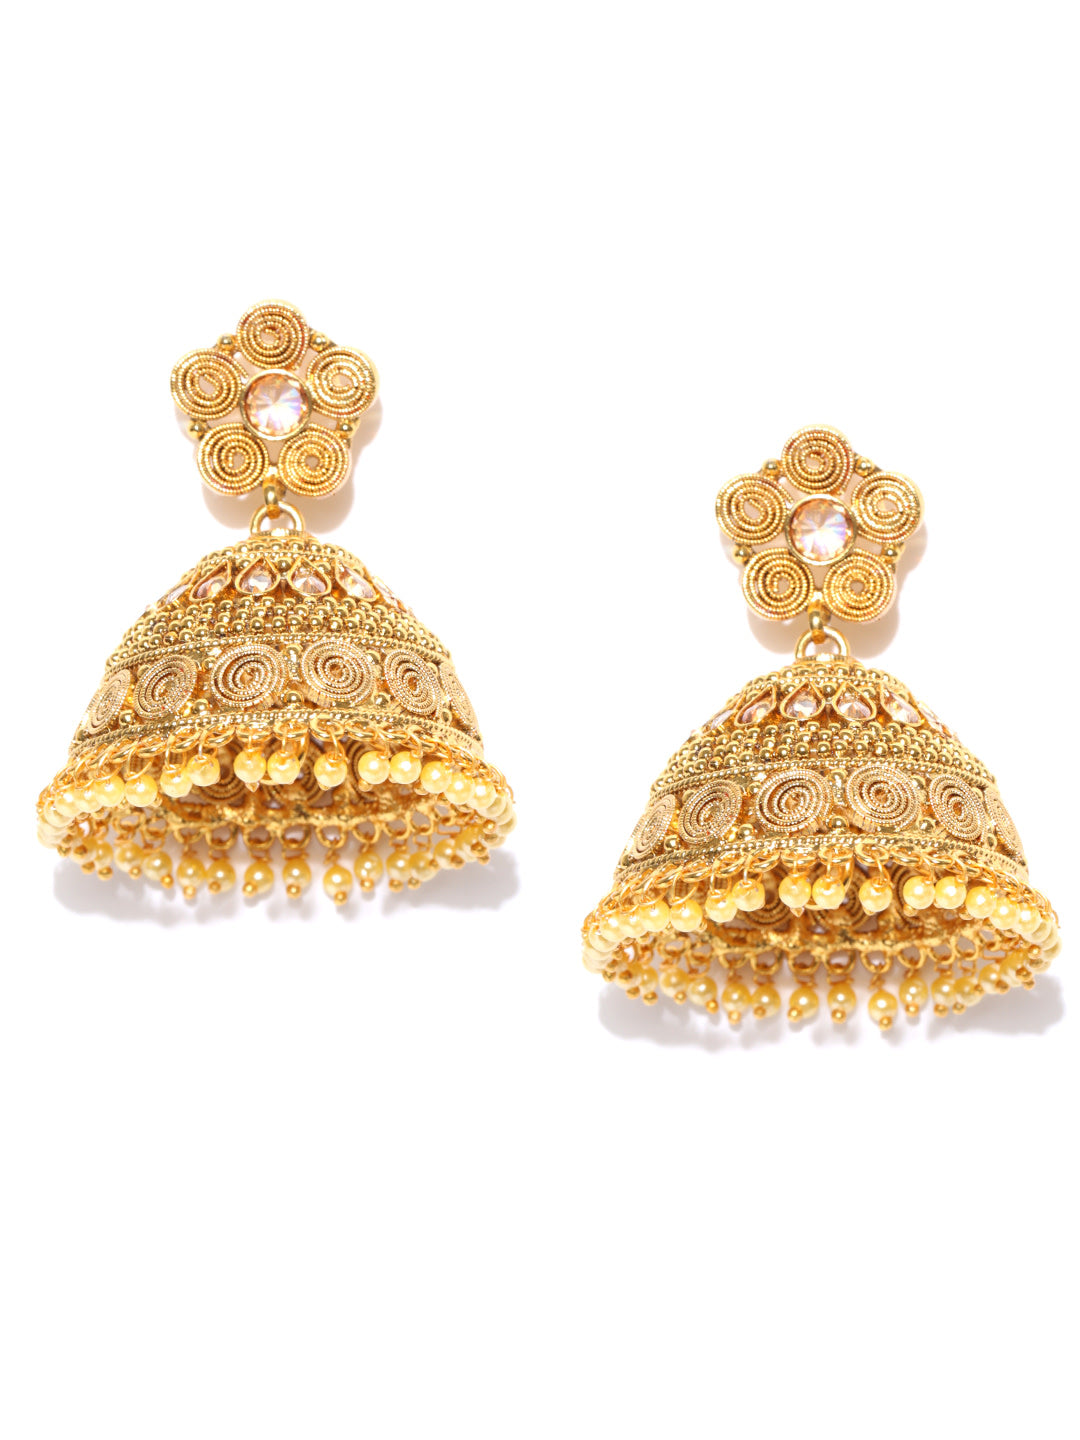 Party Wear 18k Gold Plated Pearl Jhumki/Jhumka Earrings For Girls and Women